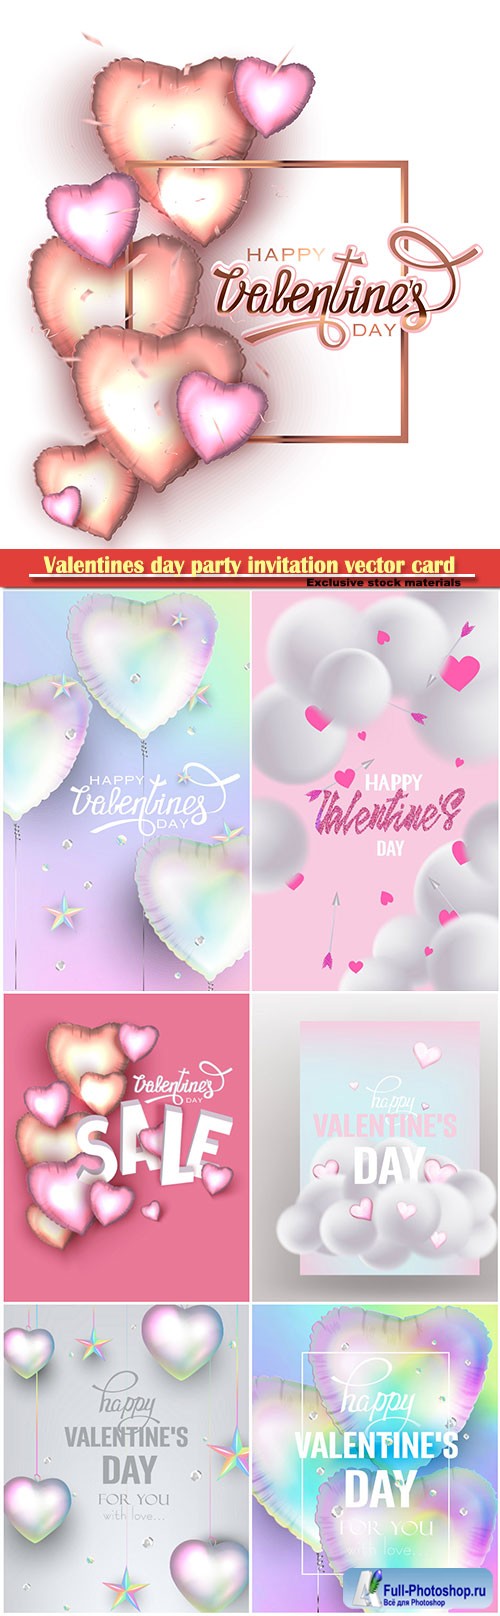 Valentines day party invitation vector card # 6